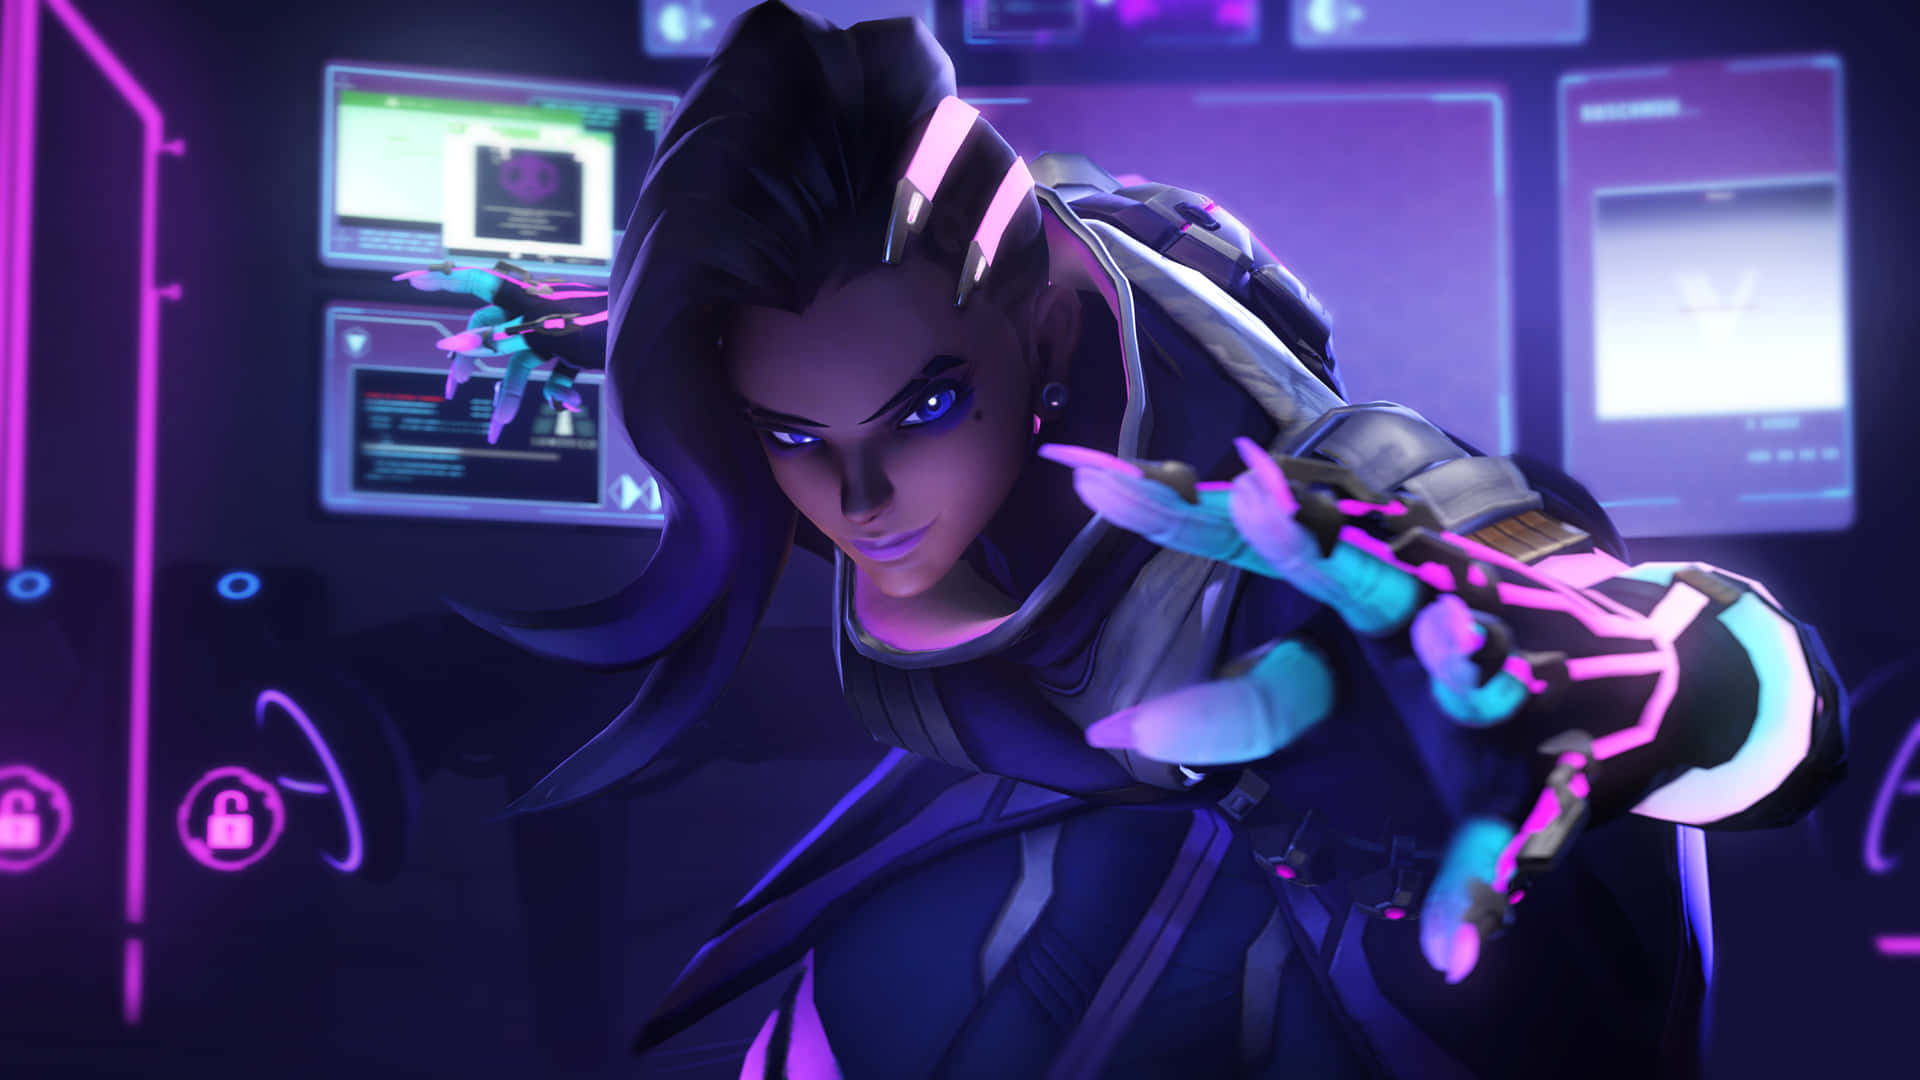 Captivating Aesthetic Overwatch: Venture into the Futuristic World Wallpaper